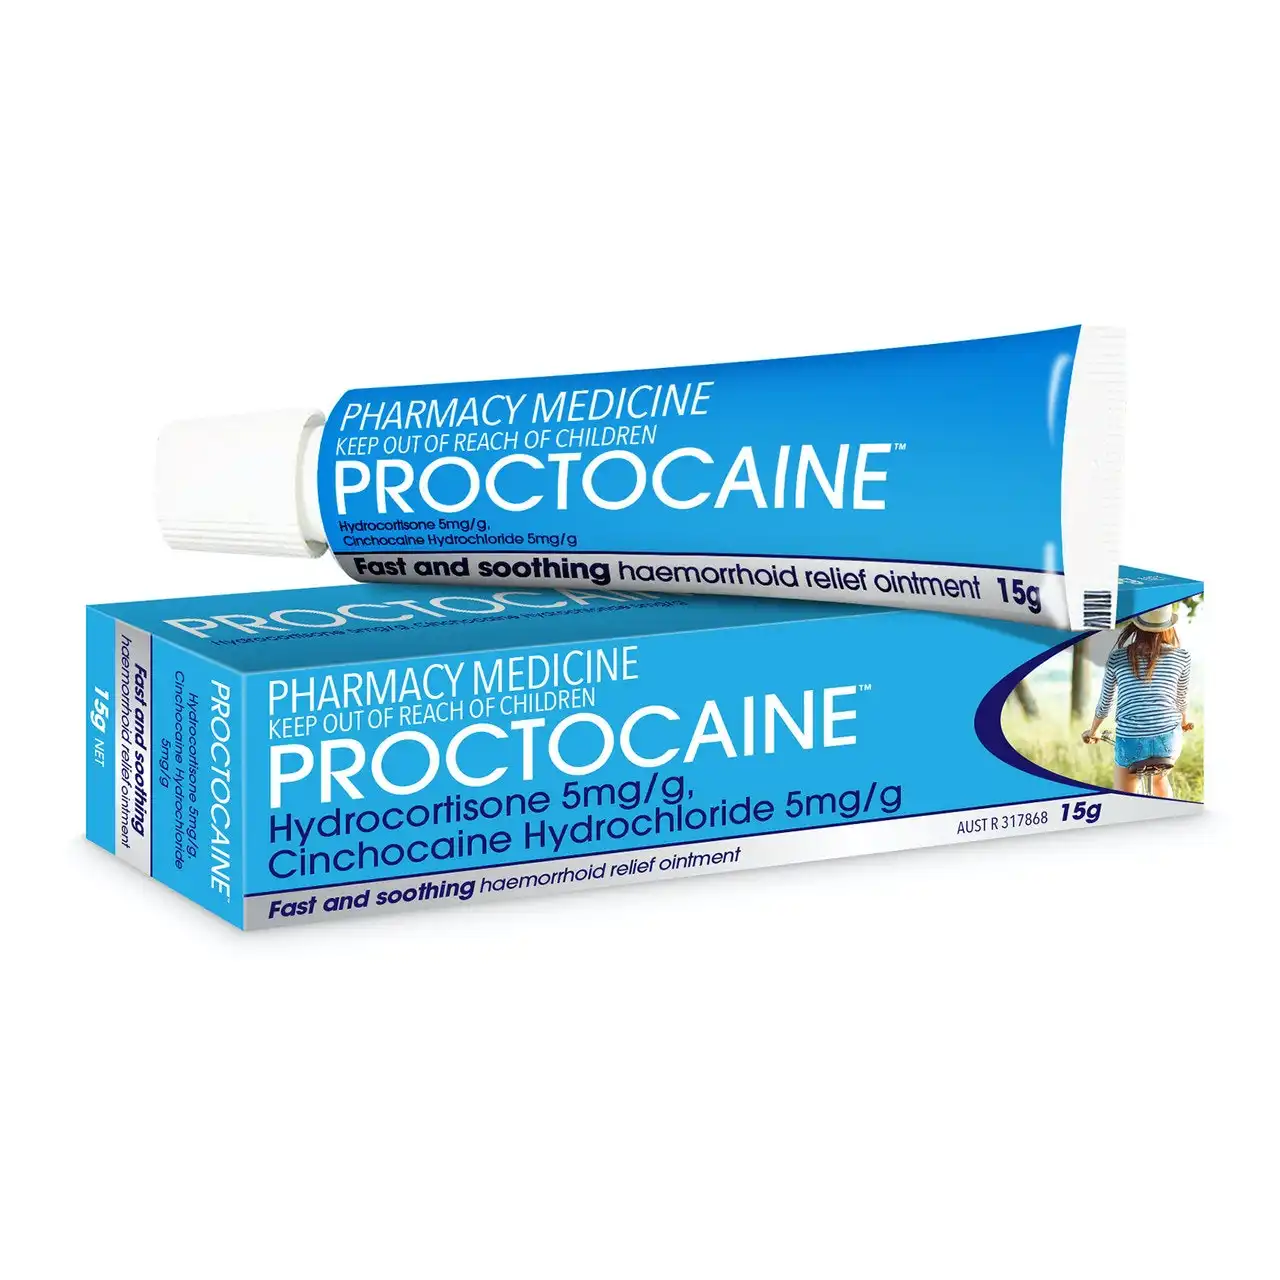 Proctocaine Haemorrhoid Relief Ointment 15g